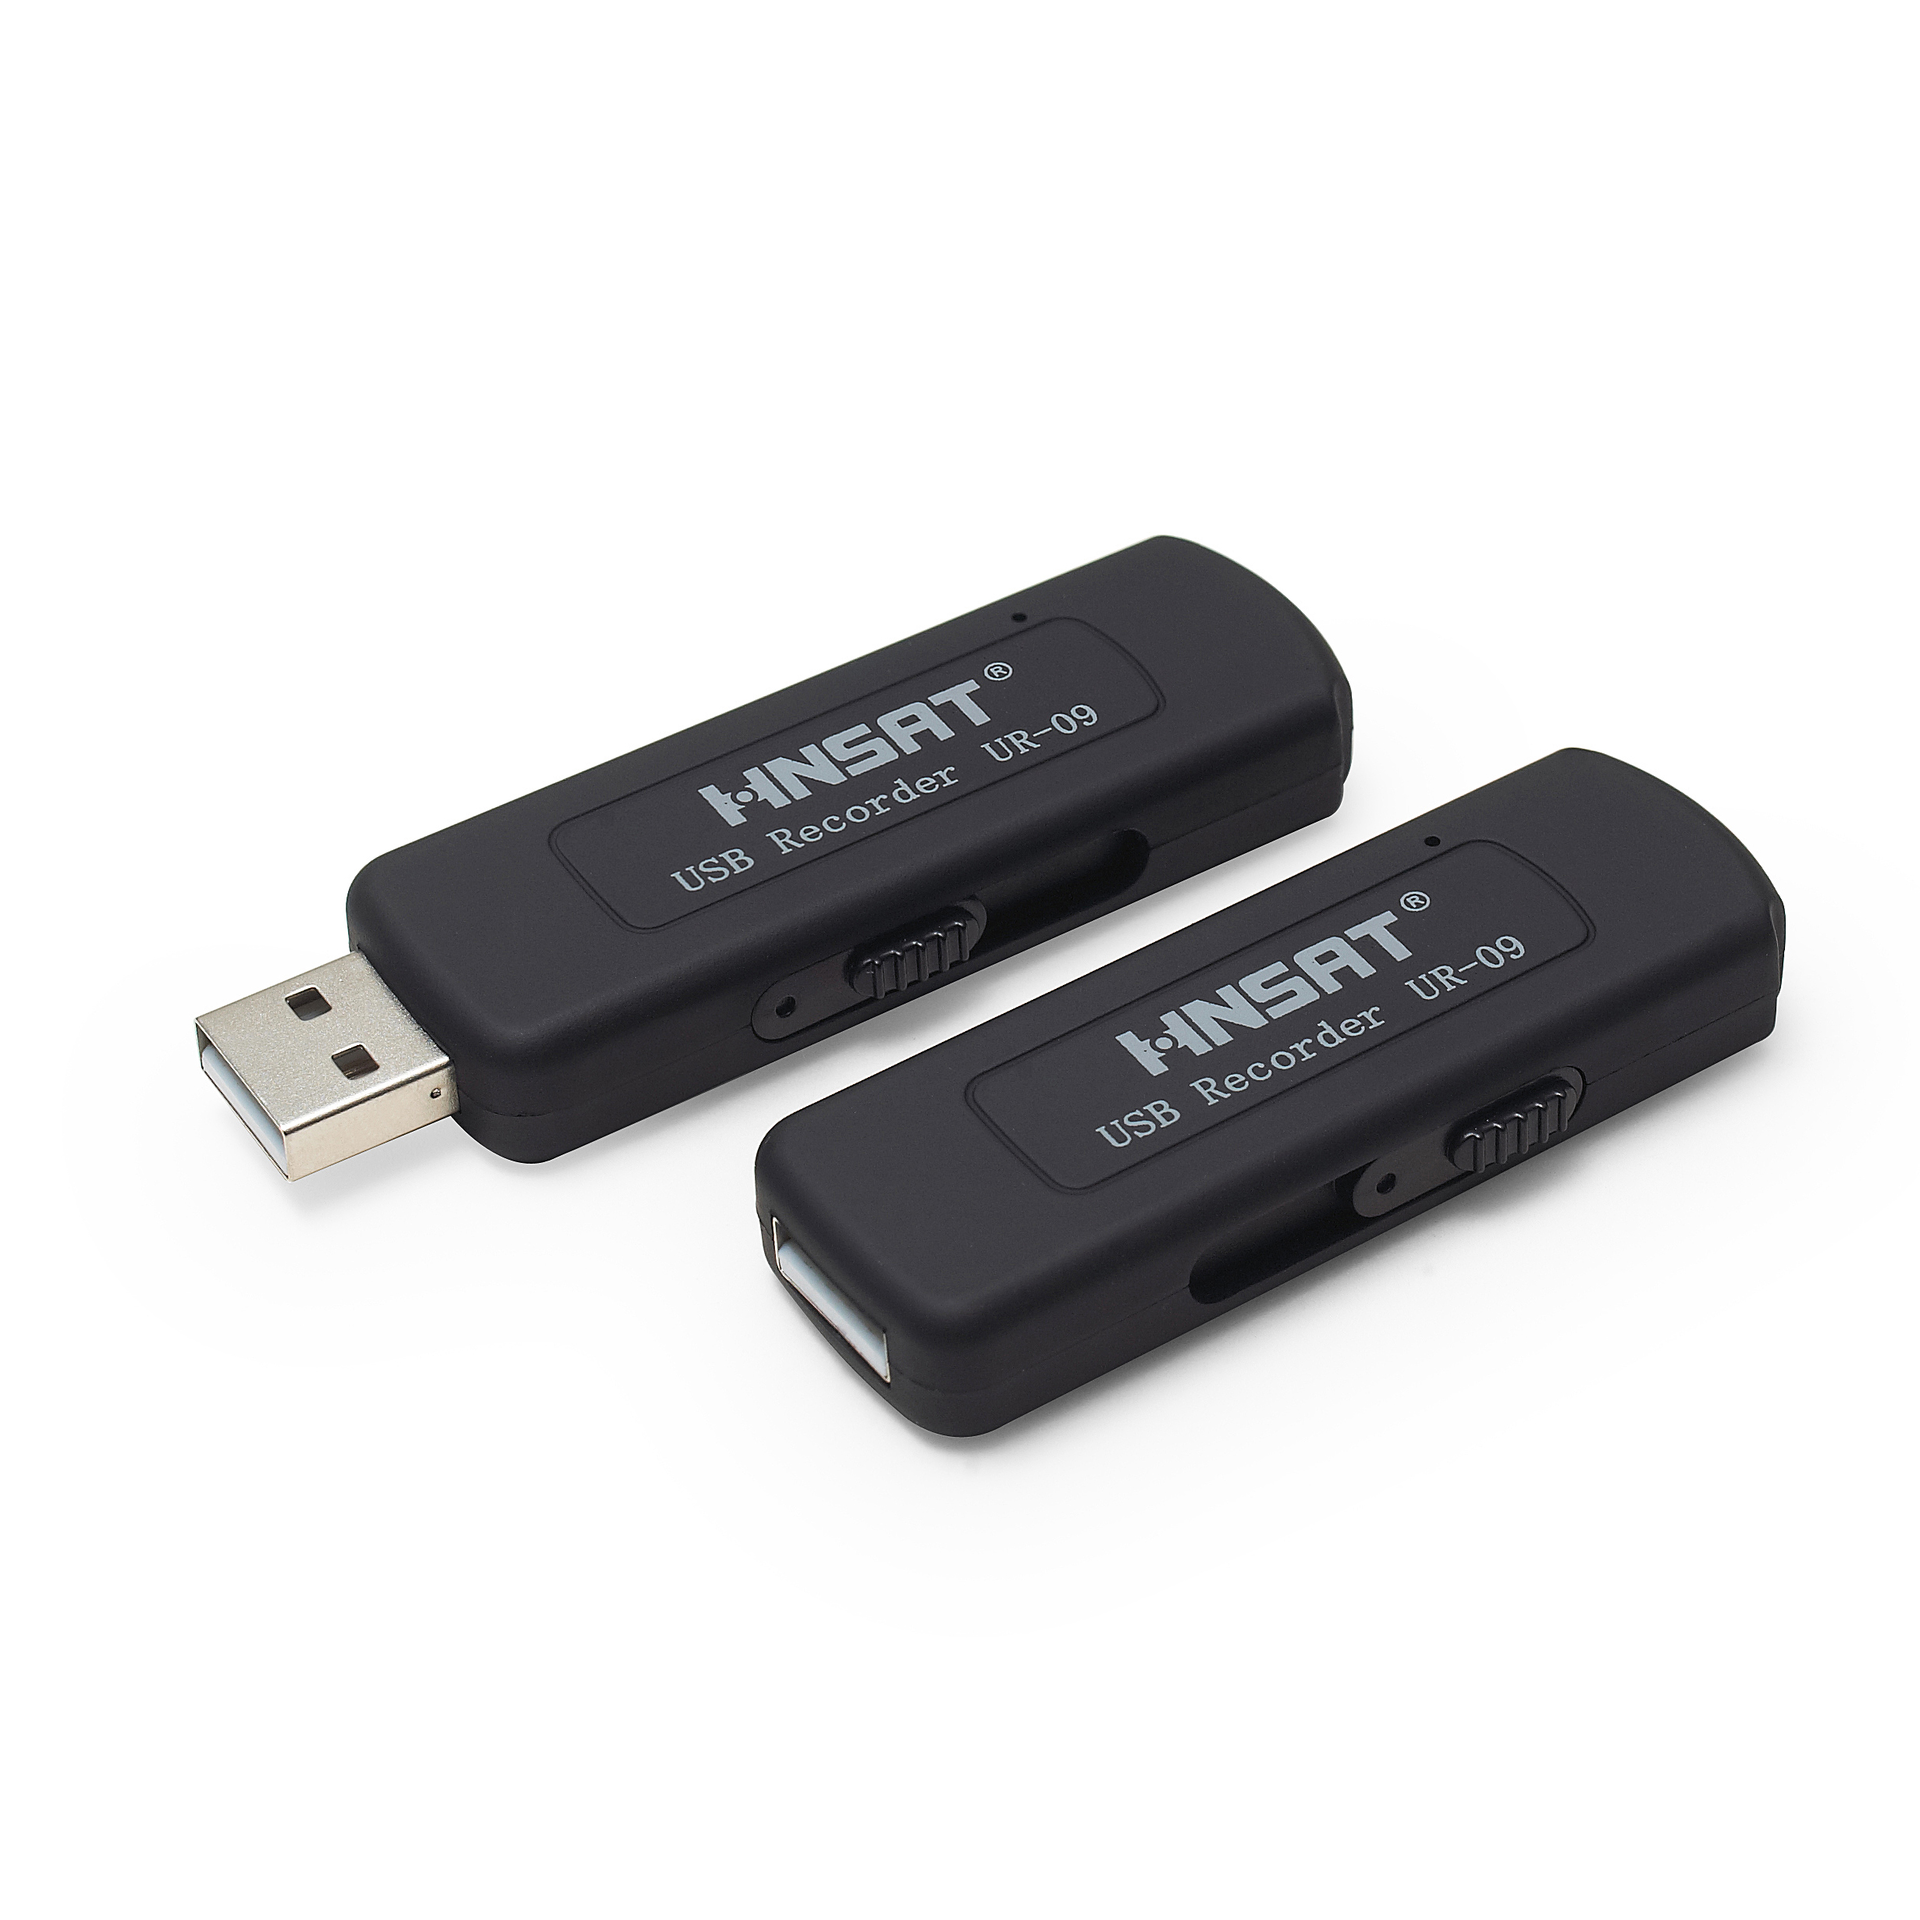 product-Hnsat-New Arrivals USB Voice Recorder Voice Activated Recording Device for Lecture Meeting I